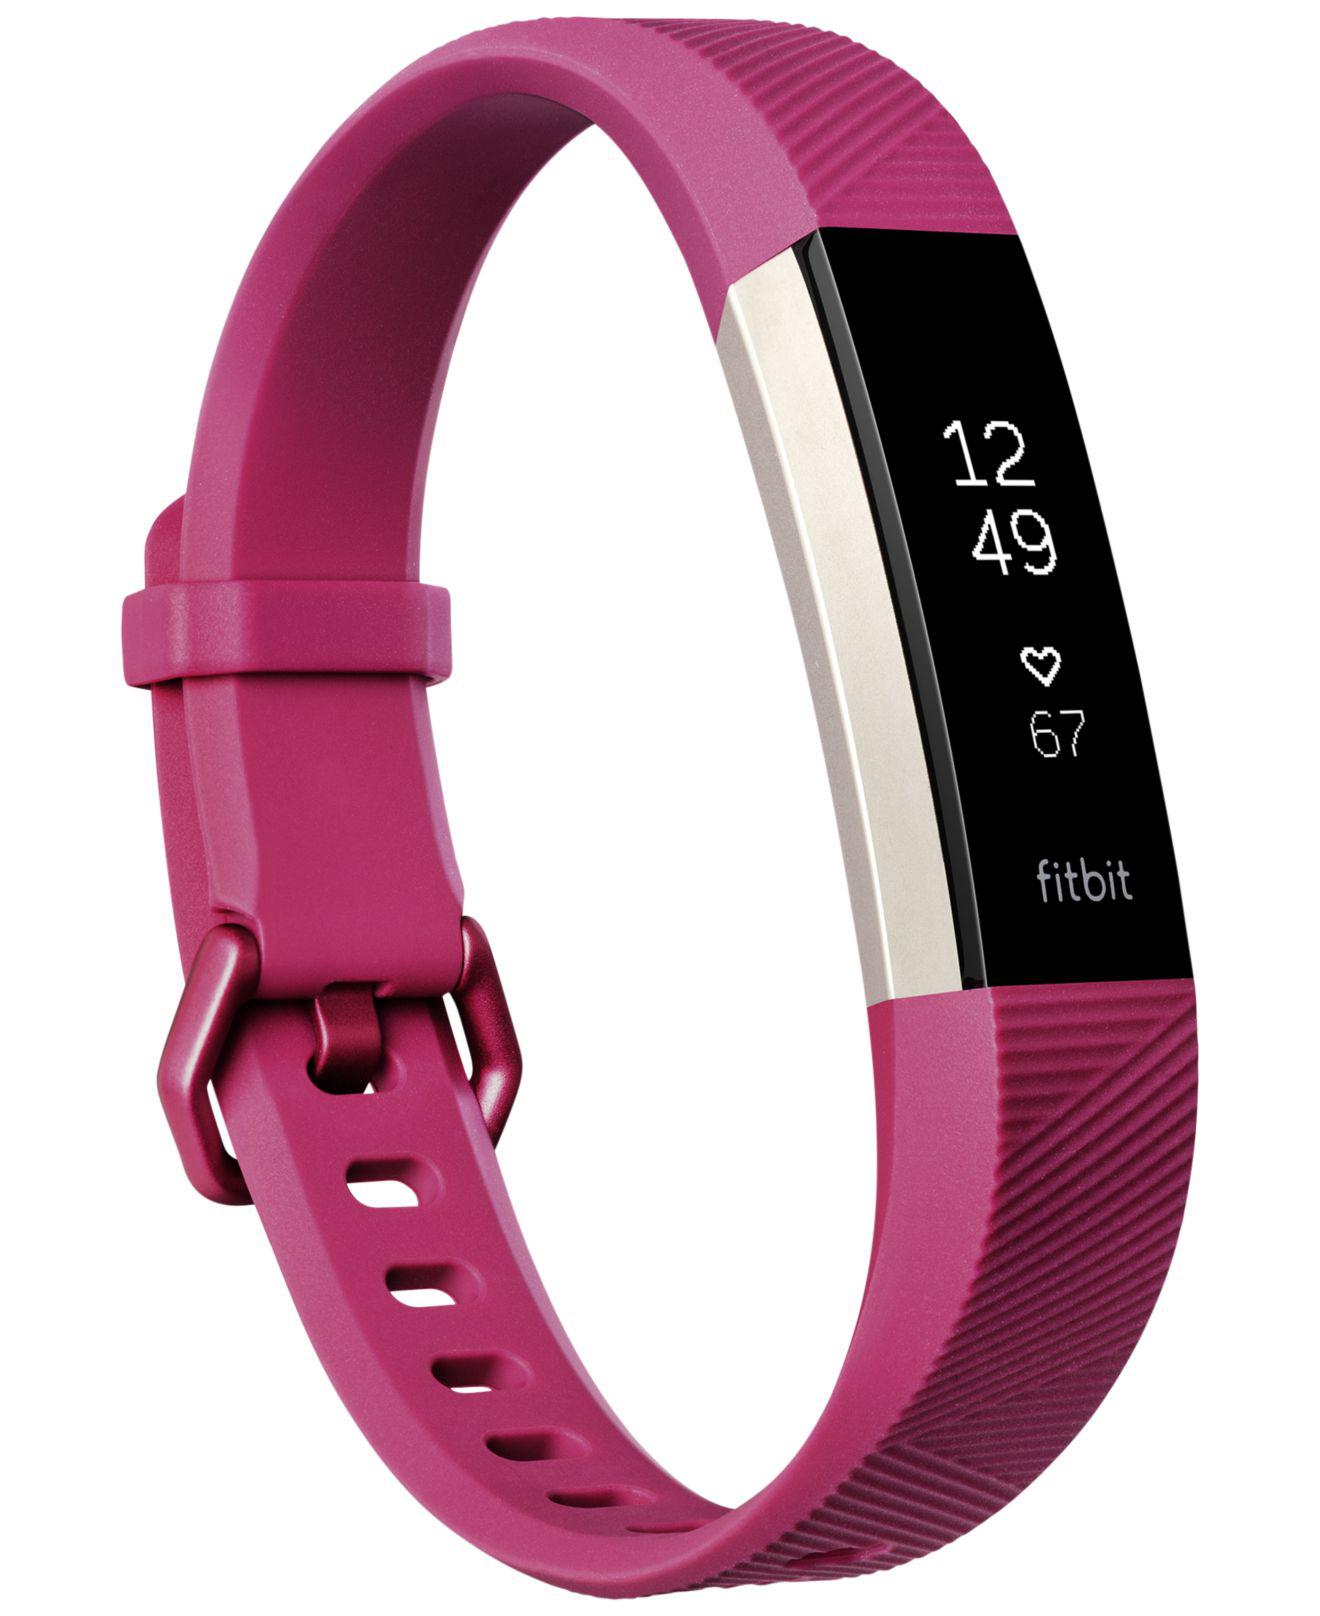 Fitbit Leather Women's Alta Hr Pink Wristband Smart Watch 16mm ...